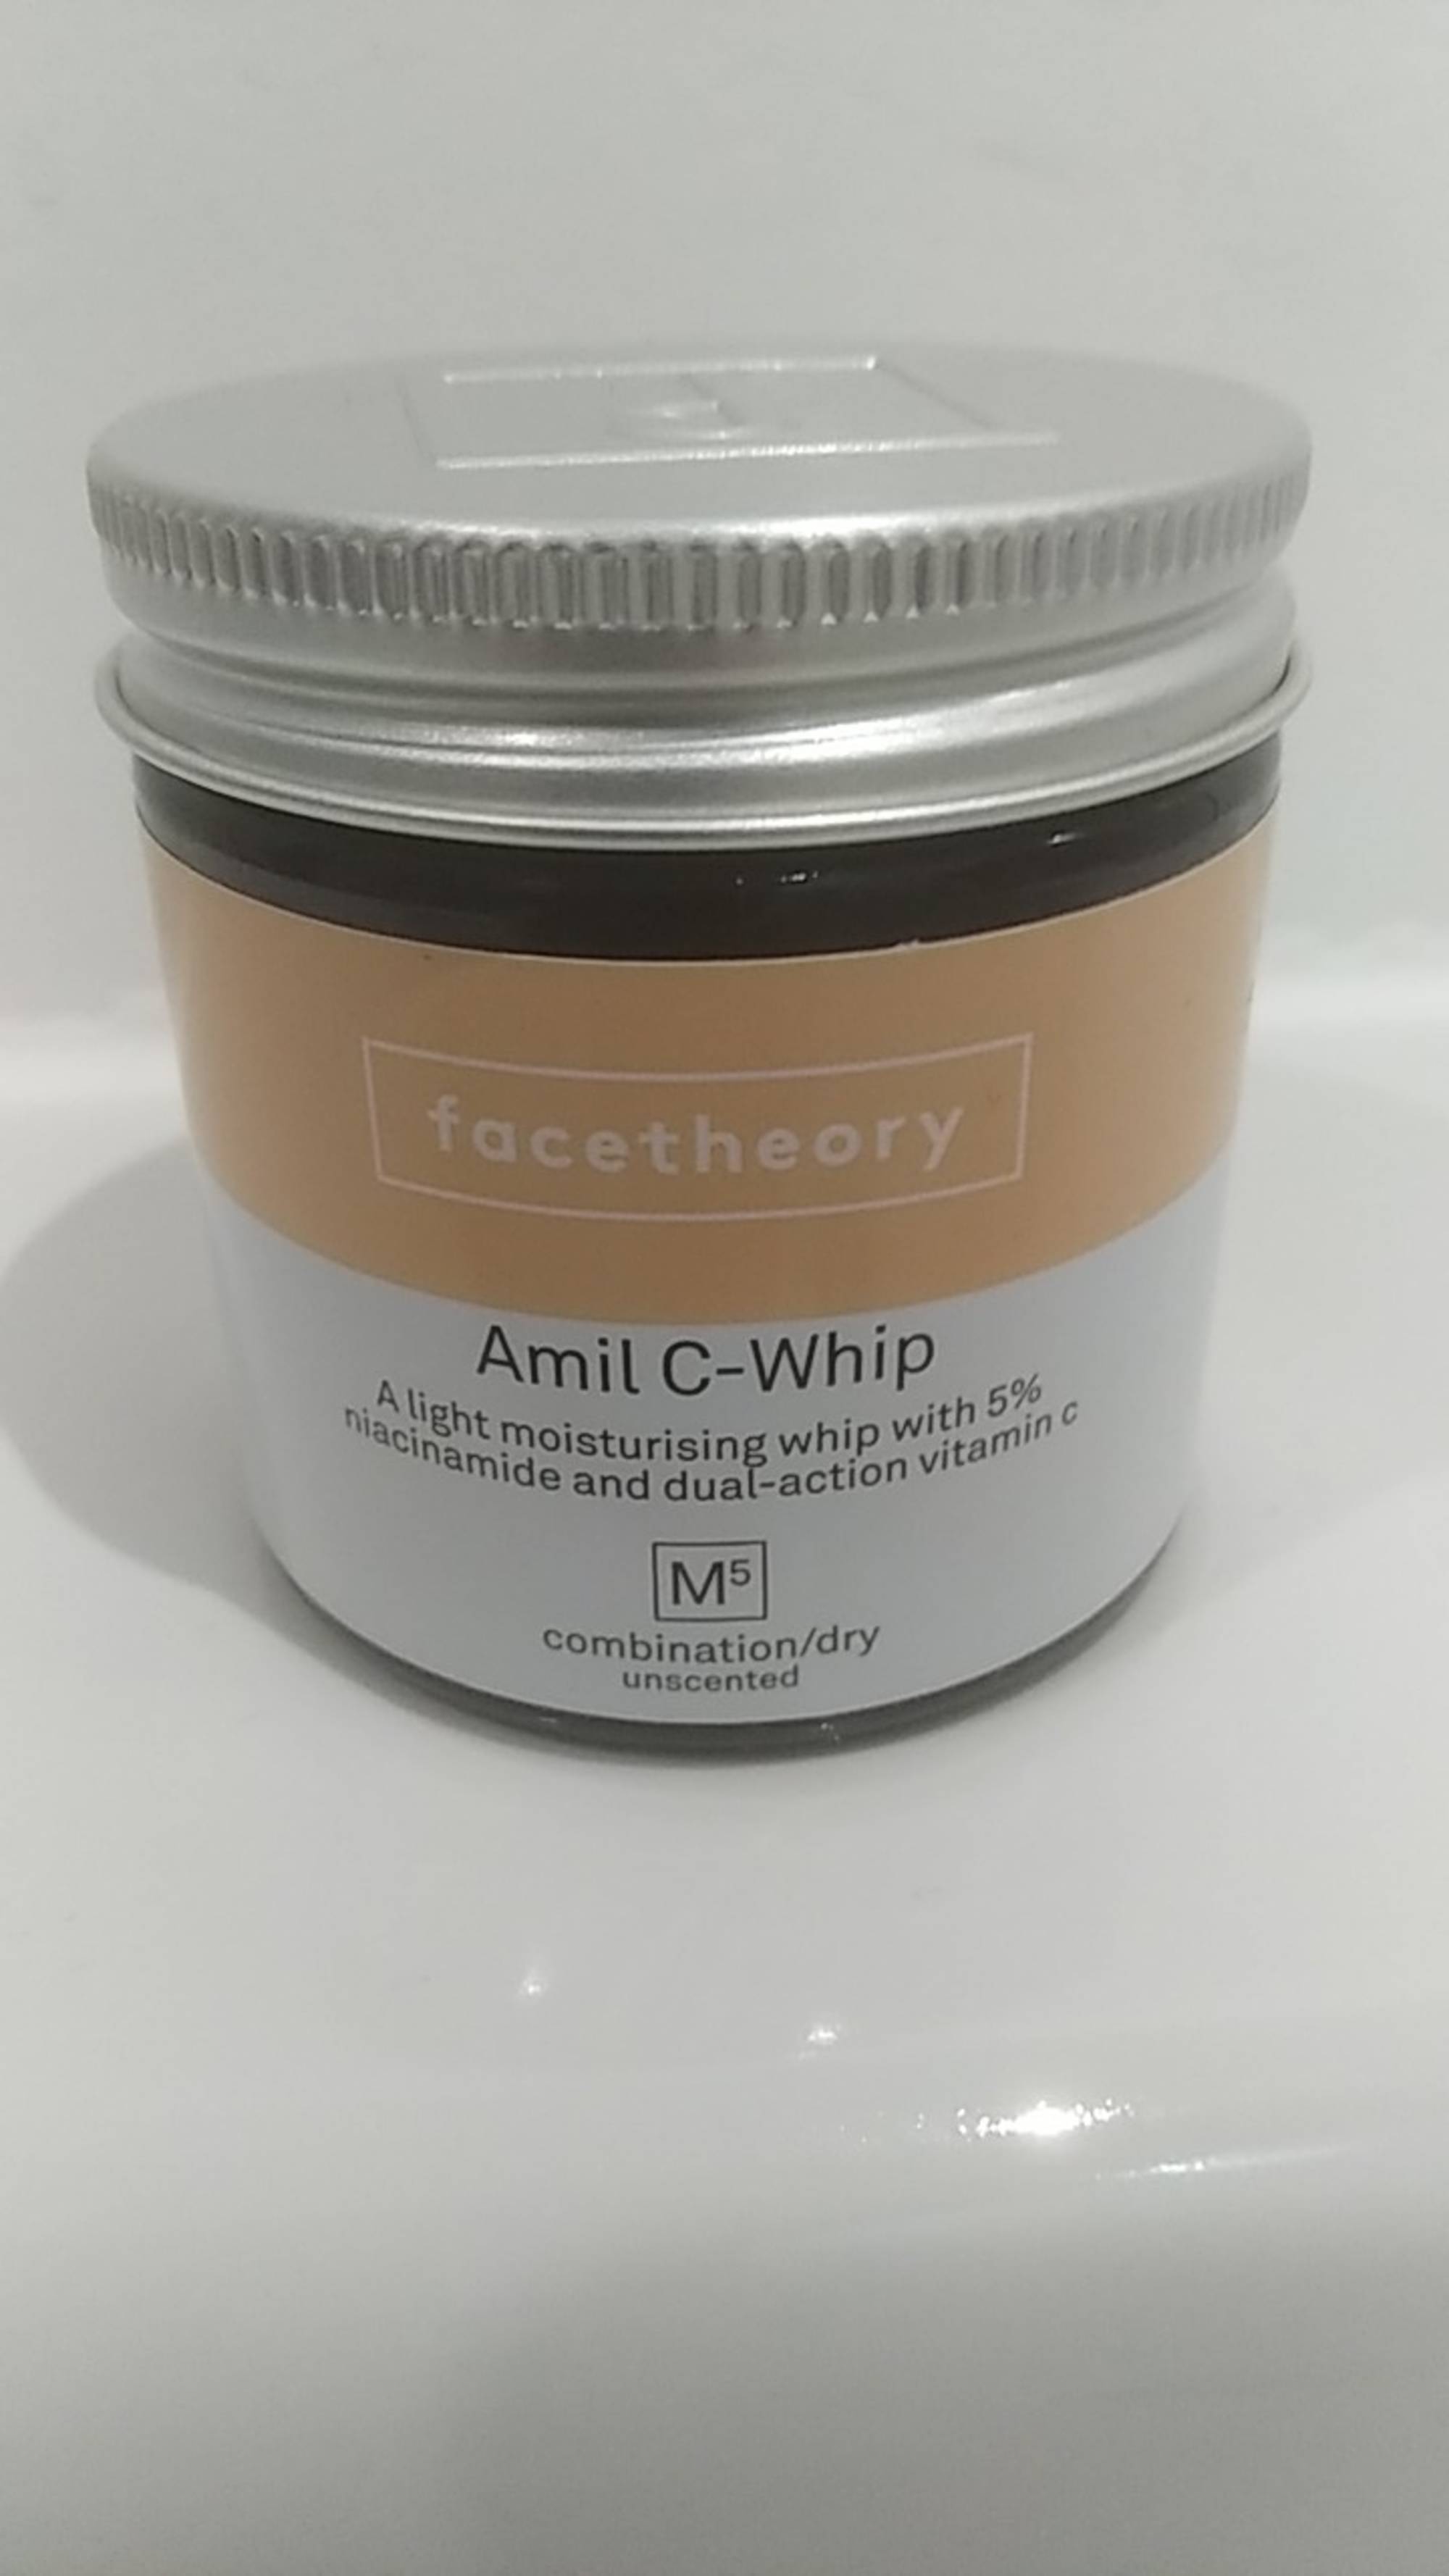 FACETHEORY - Amil C-Whip with 5% niacinamide and dual-action vitamin C